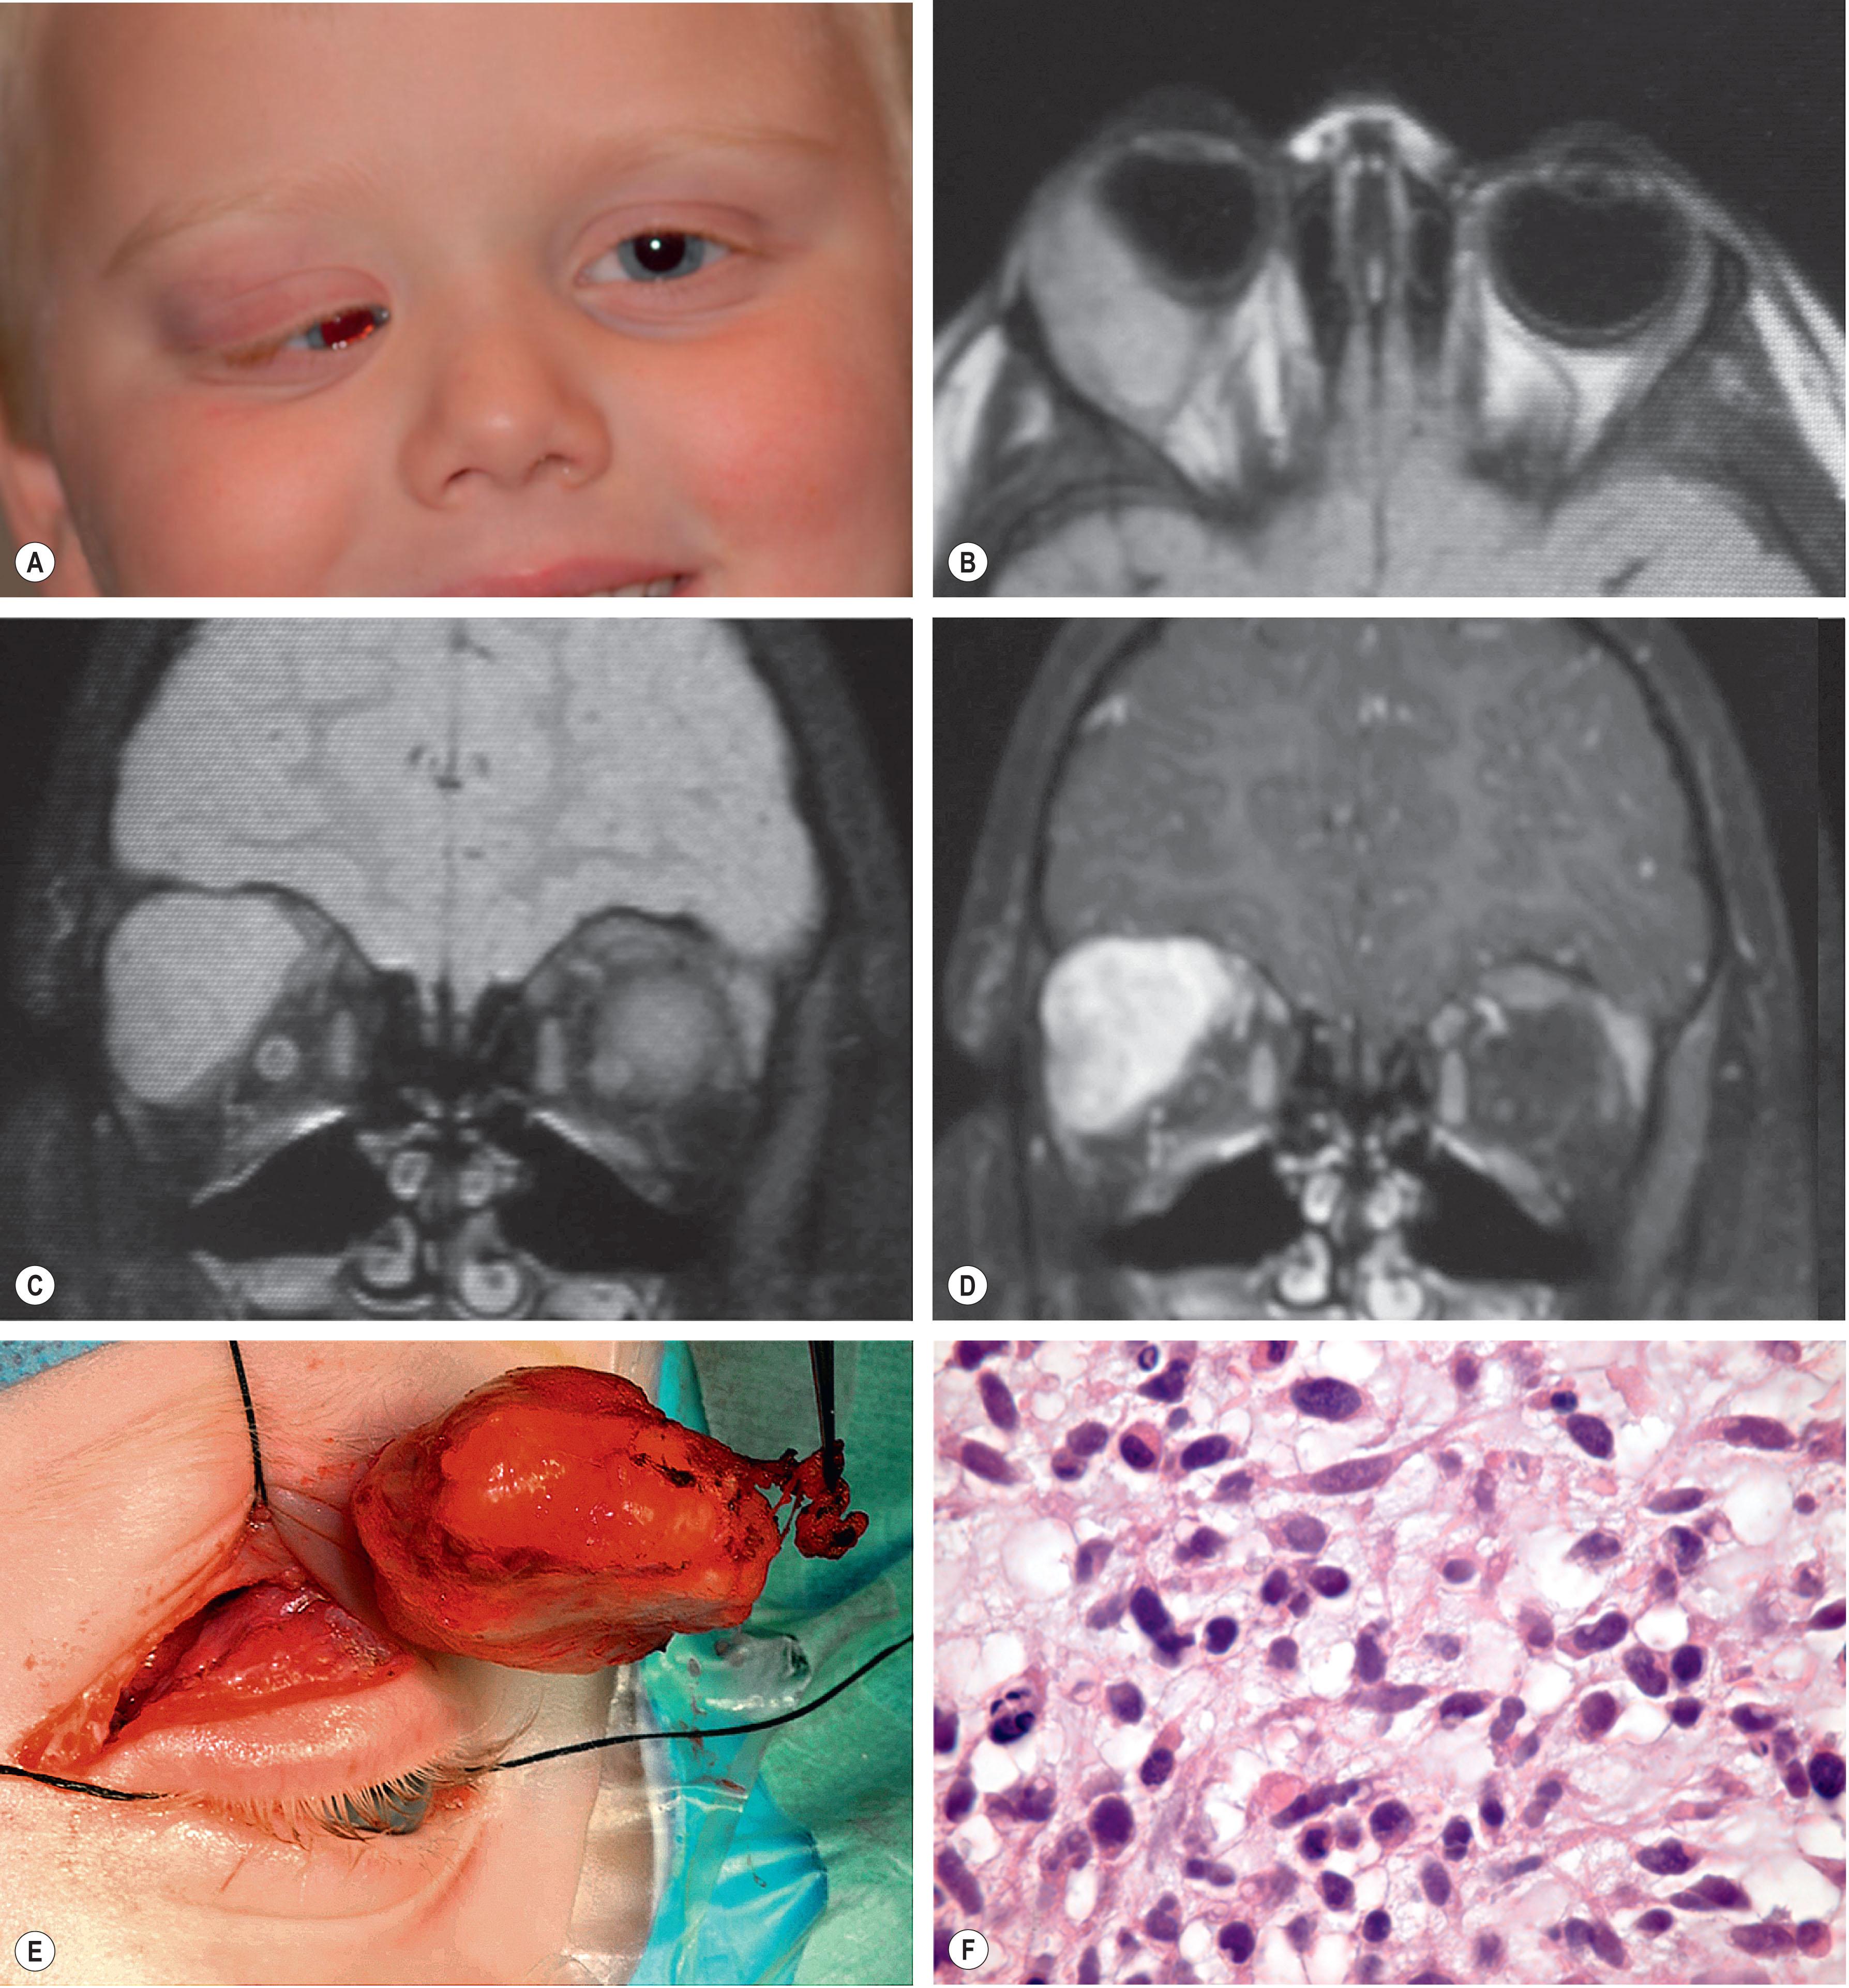 Fig. 22.2, Orbital rhabdomyosarcoma in a young boy. (A) Facial appearance showing proptosis and downward and medial displacement of right eye. (B) Axial MRI showing large superotemporal orbital mass. (C) Coronal MRI showing superotemporal mass. (D) Coronal MRI after gadolinium enhancement showing uniform enhancement of the vascular malignancy. (E) Tumor removed by superolateral orbitotomy. (F) Histopathology showing malignant elongated strap cells and round cells, consistent with orbital rhabdomyosarcoma.